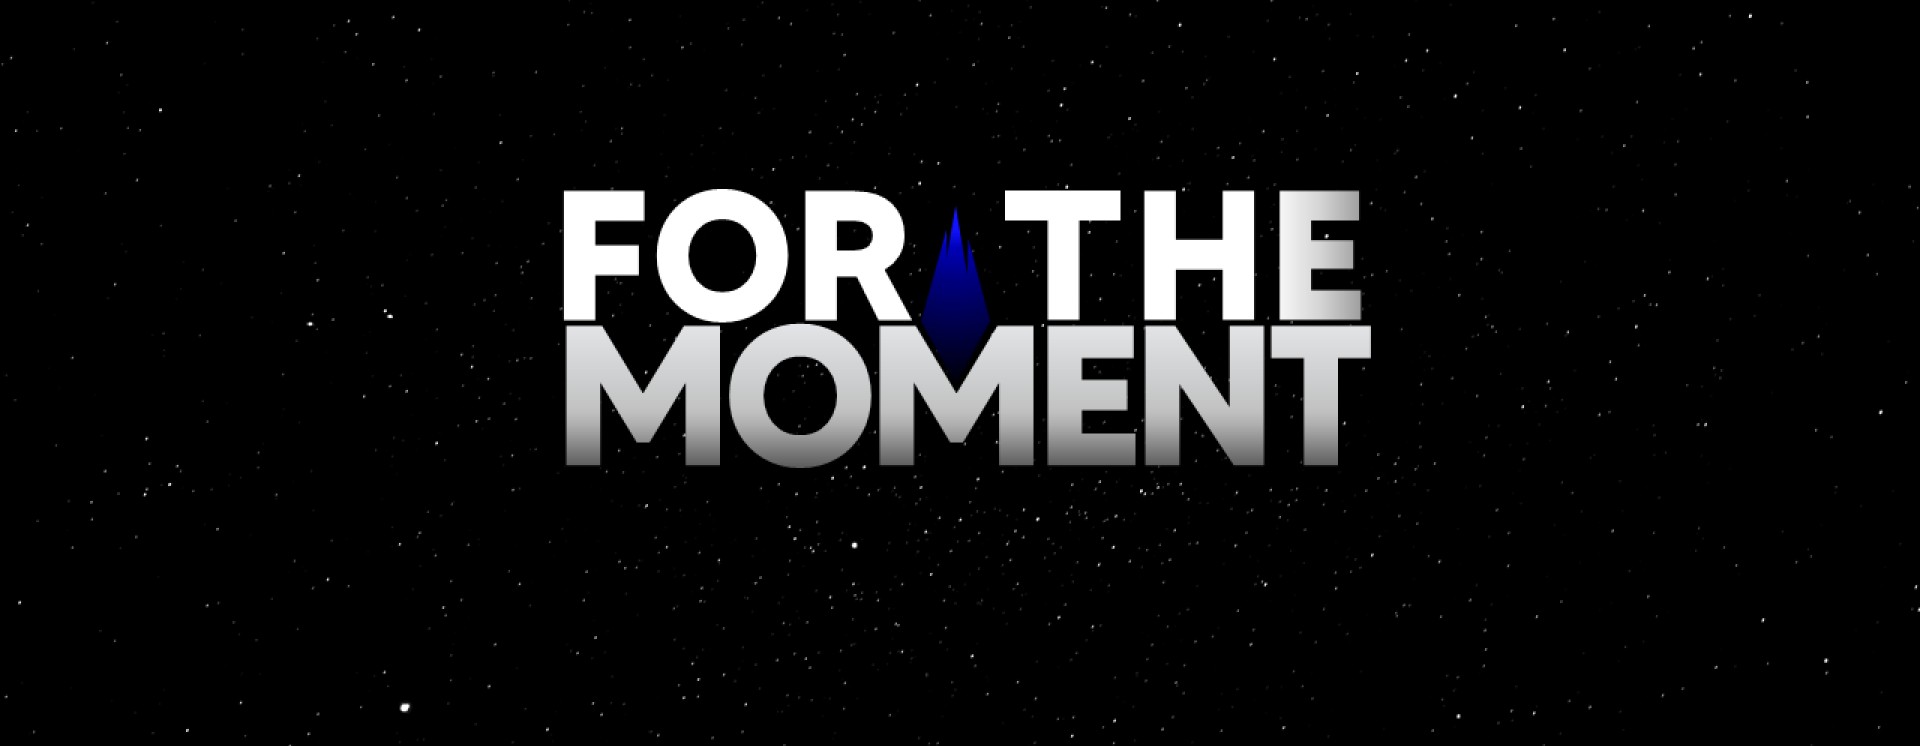 own the moment background